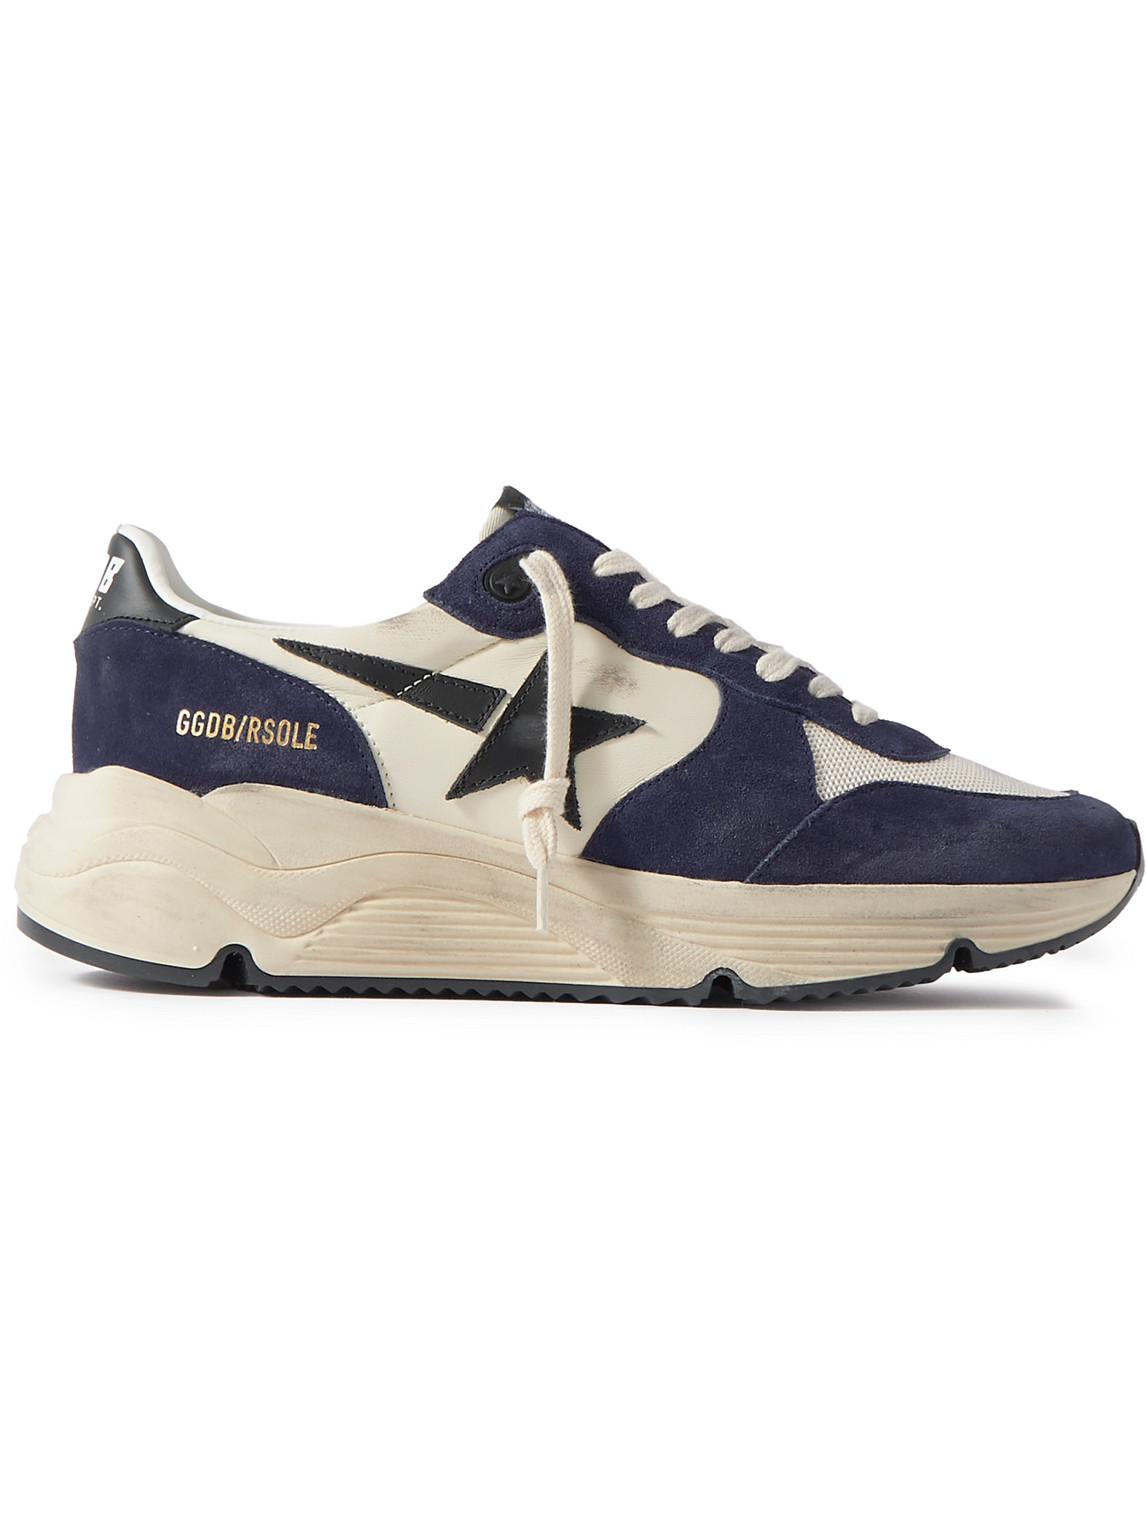 Golden Goose Running Sole Distressed Leather, Suede And Mesh Sneakers In Navy Beige